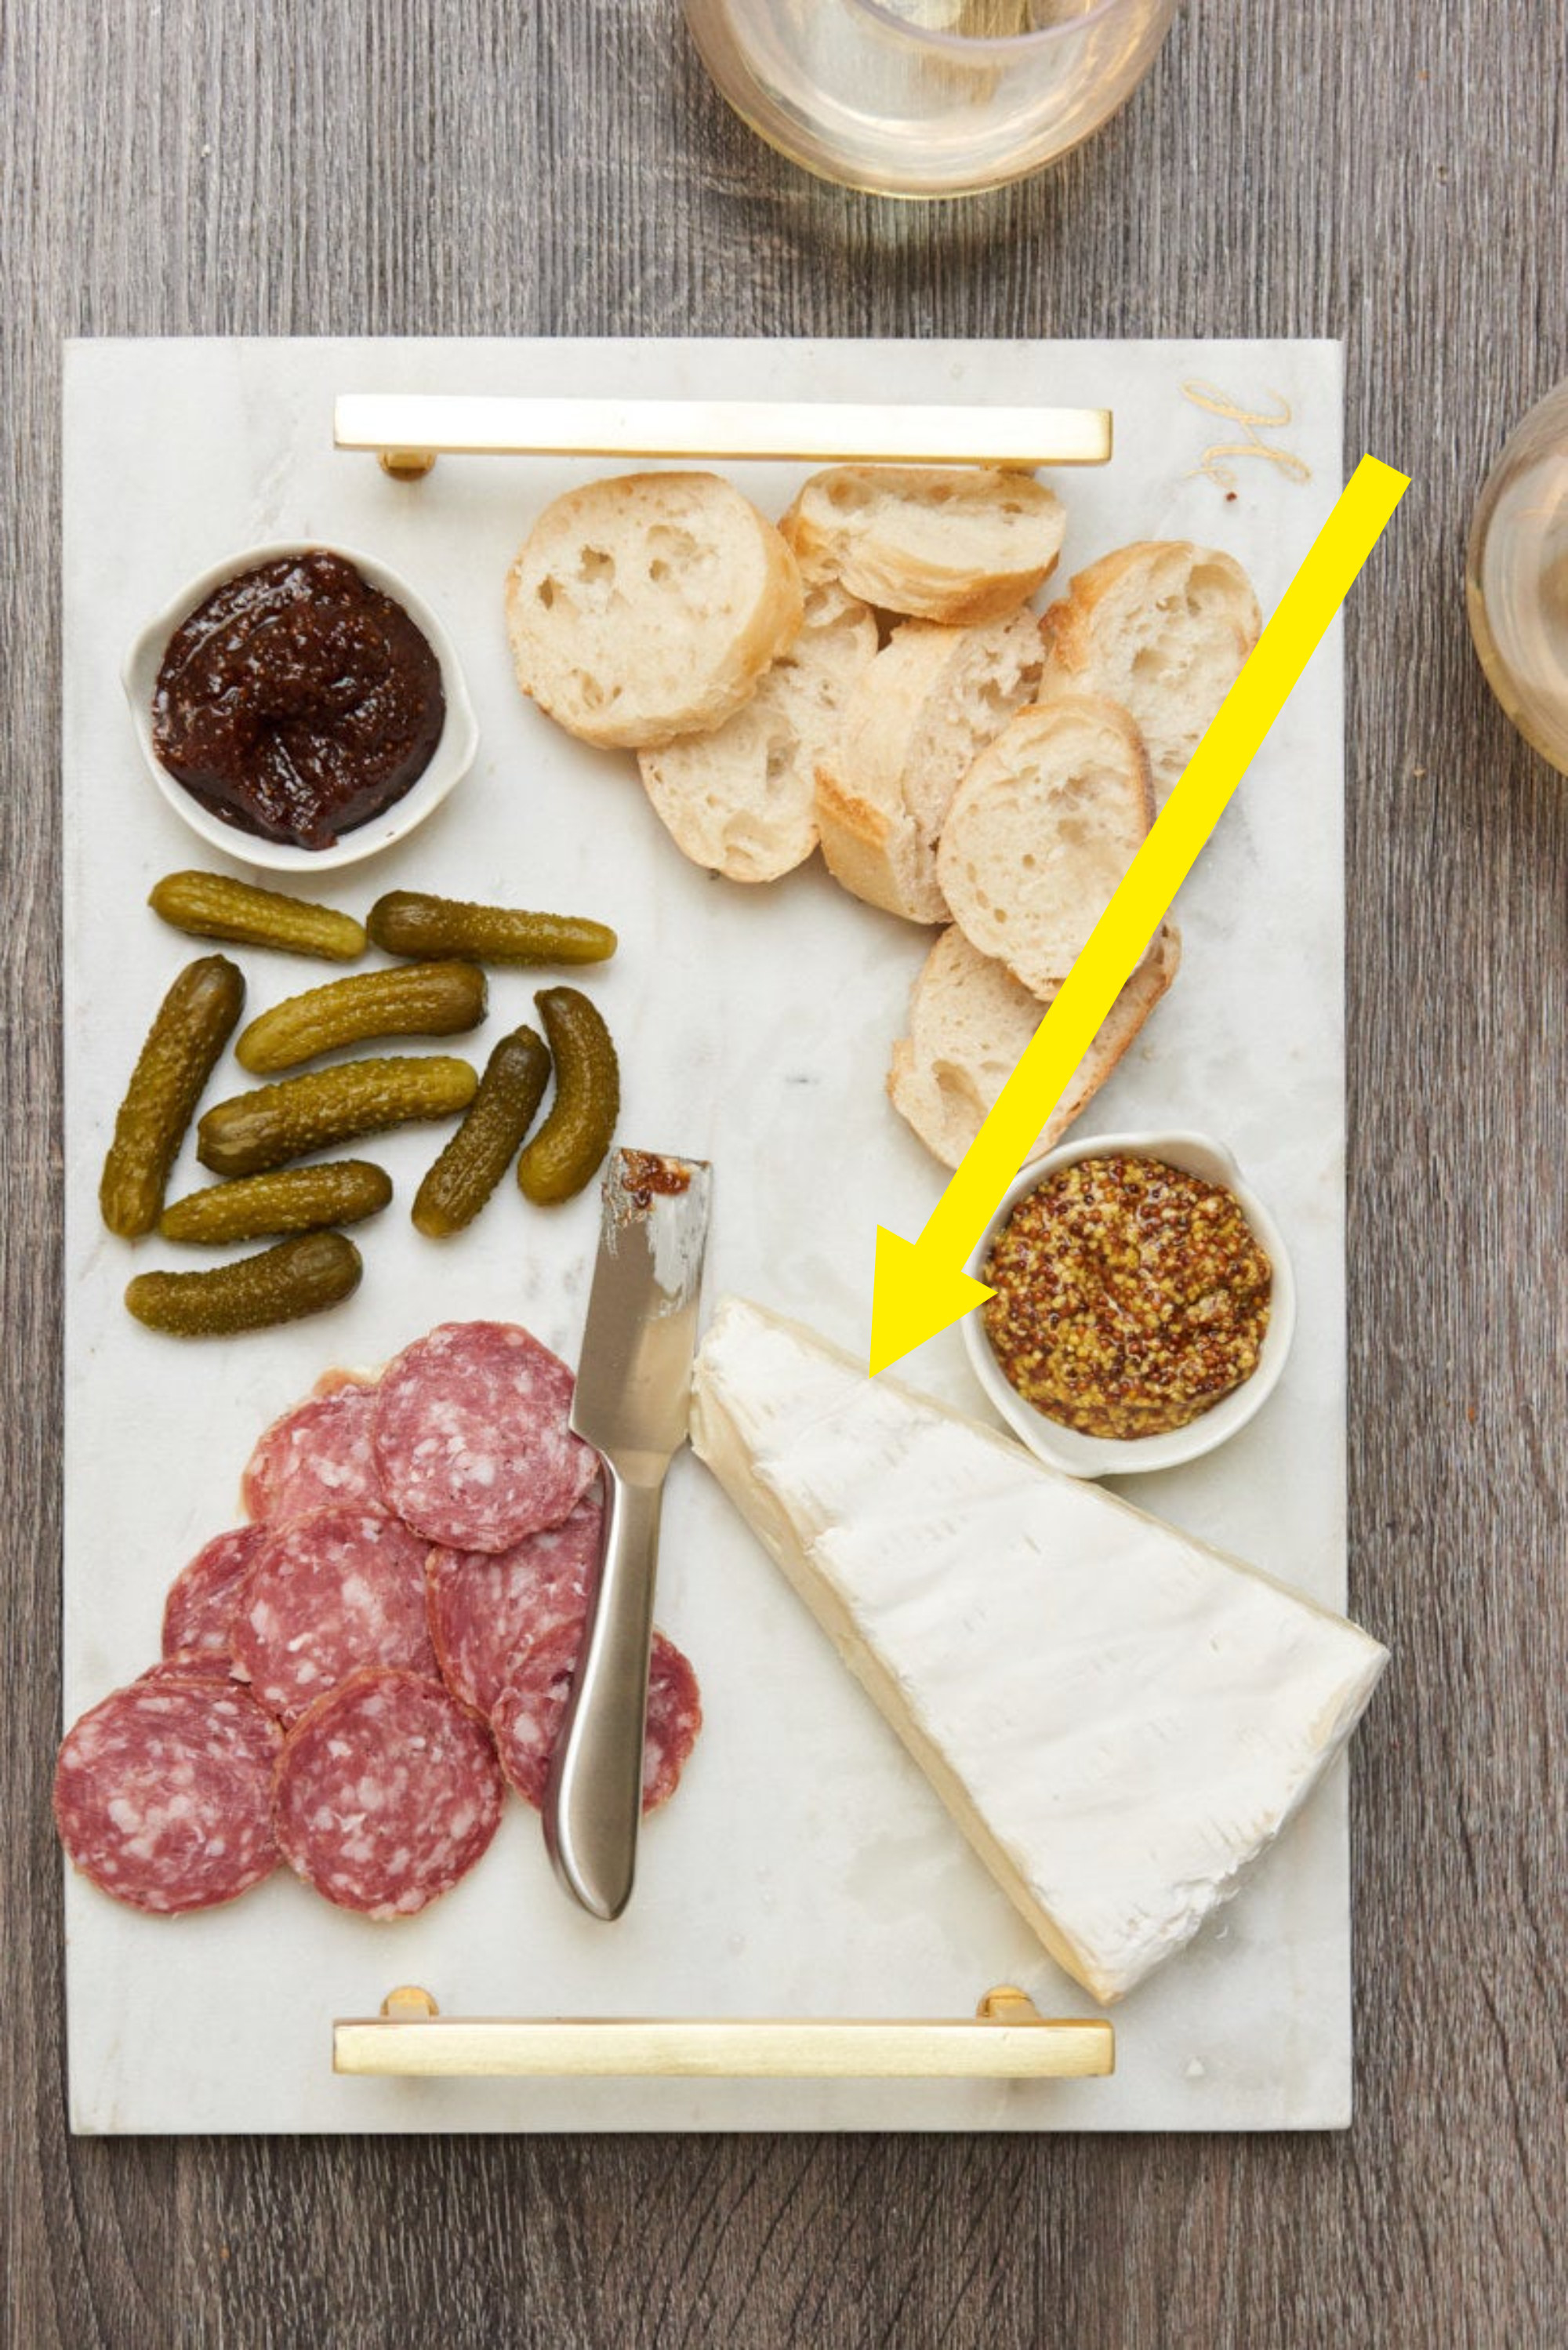 A cheese and charcuterie board.